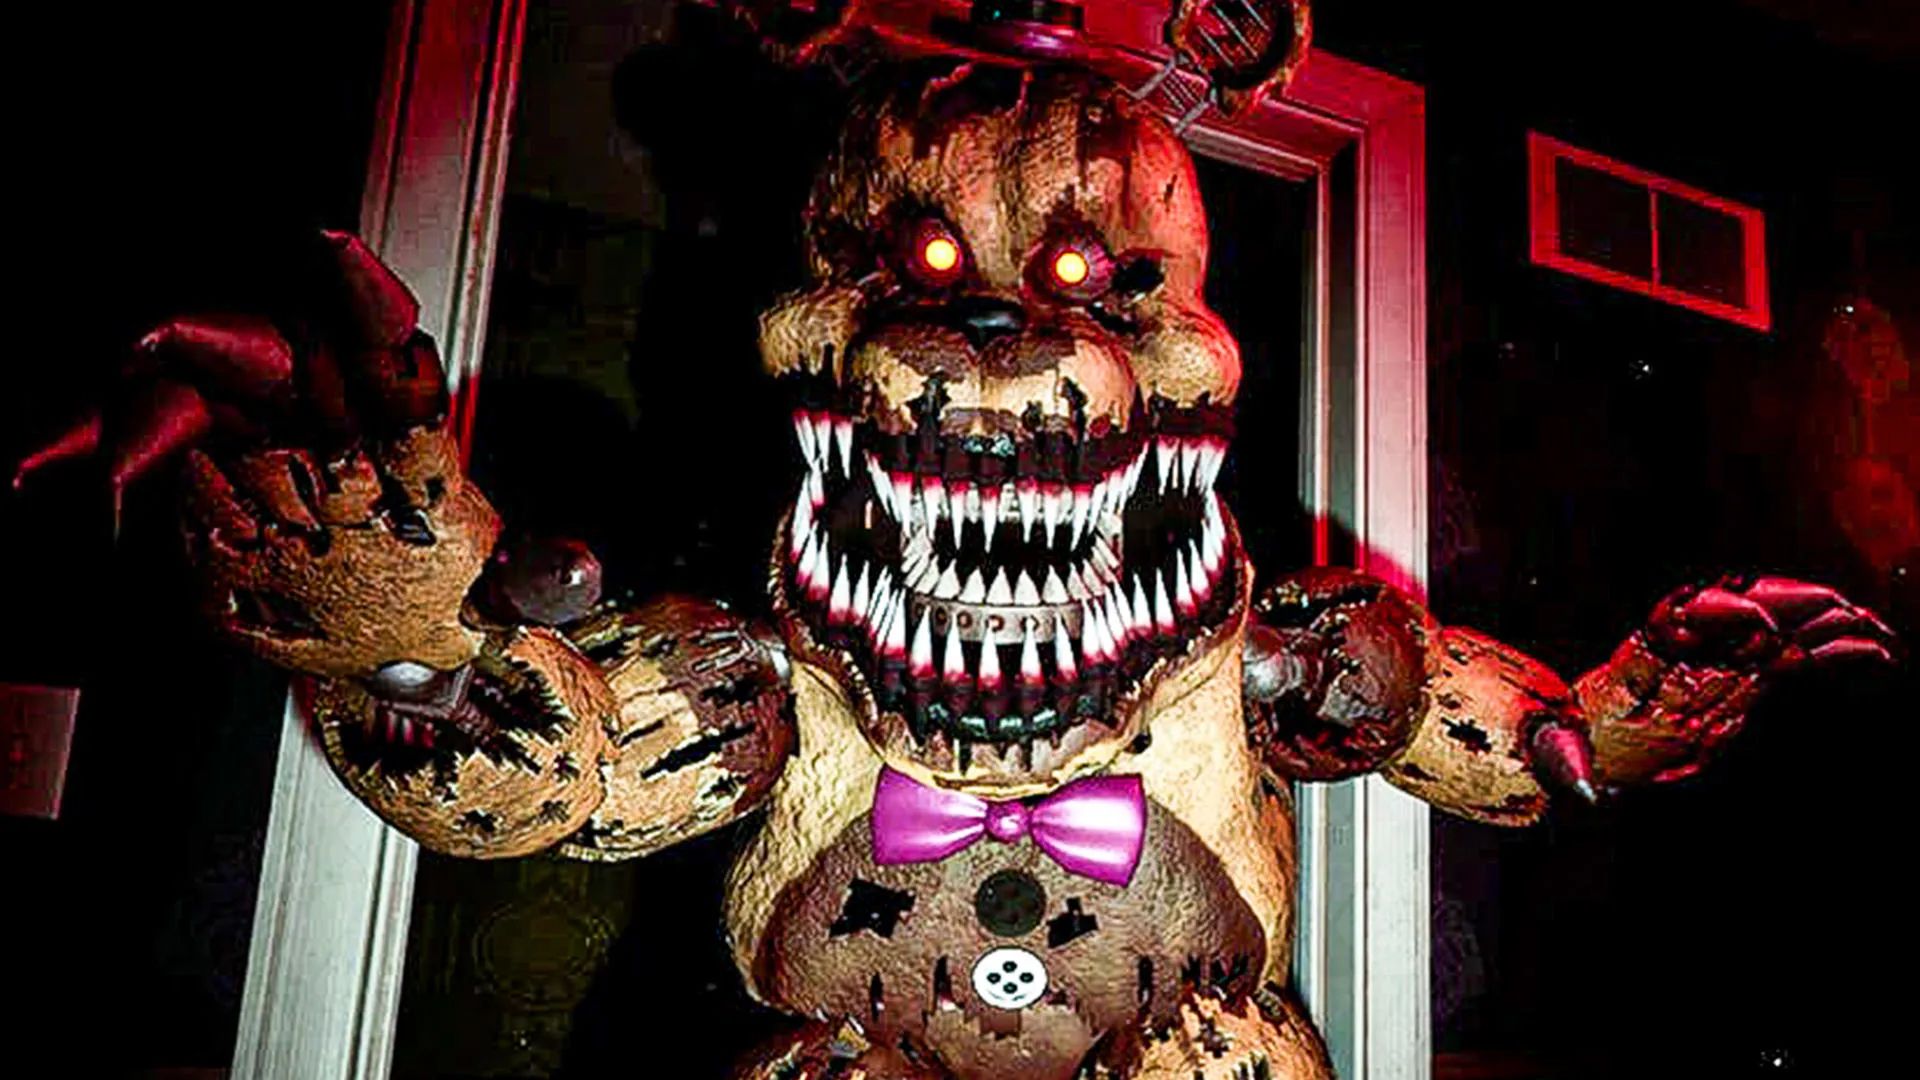 Five Nights at Freddy's Creator Responds to Movie Success - IGN the Fix:  Entertainment - IGN